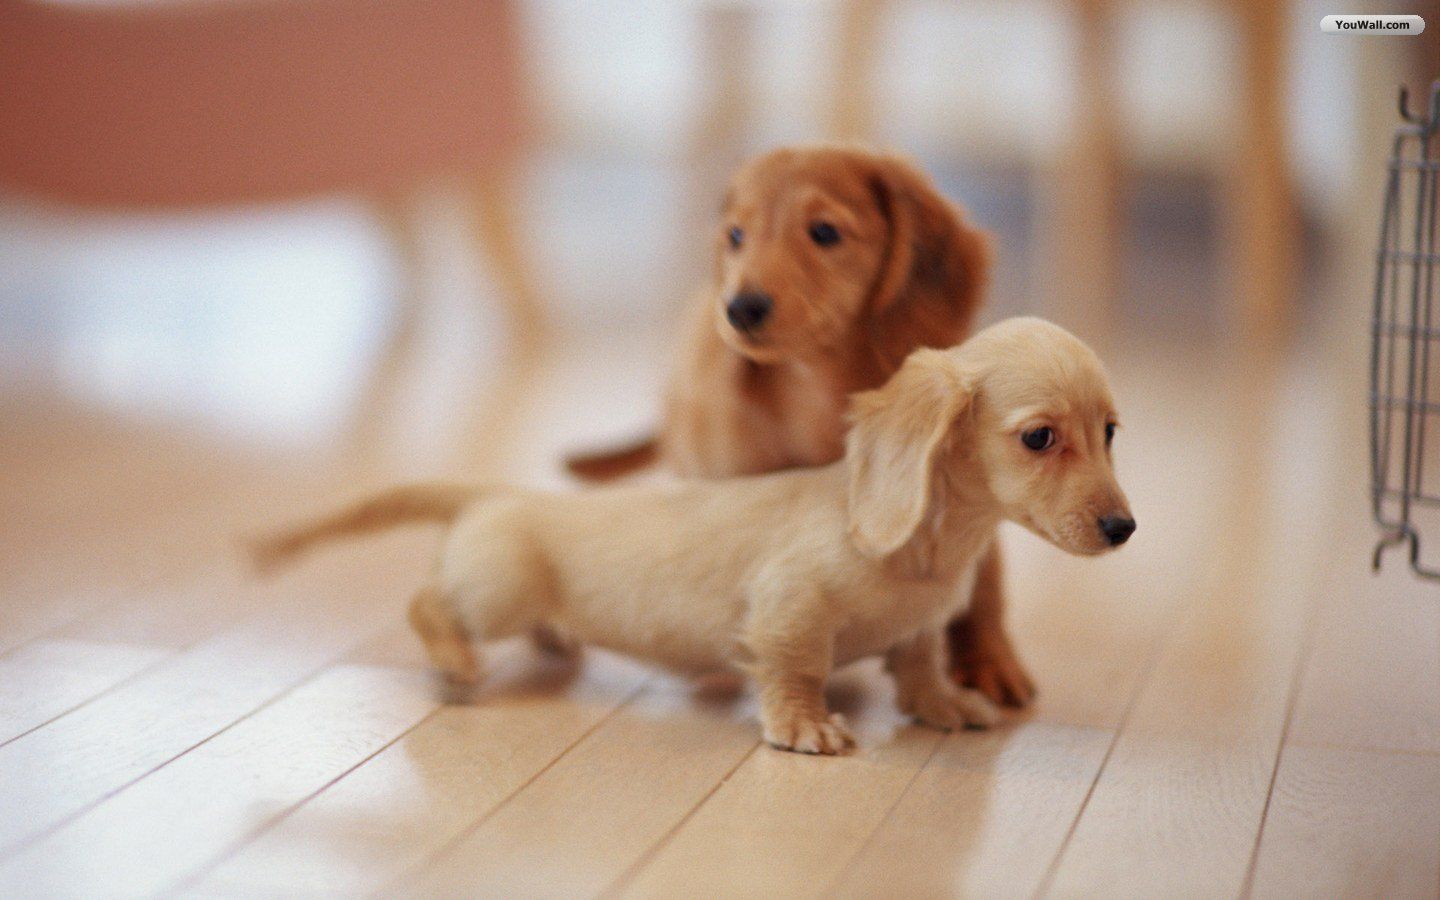 YouWall - Lovely Puppies Wallpaper - wallpaper,wallpapers,free